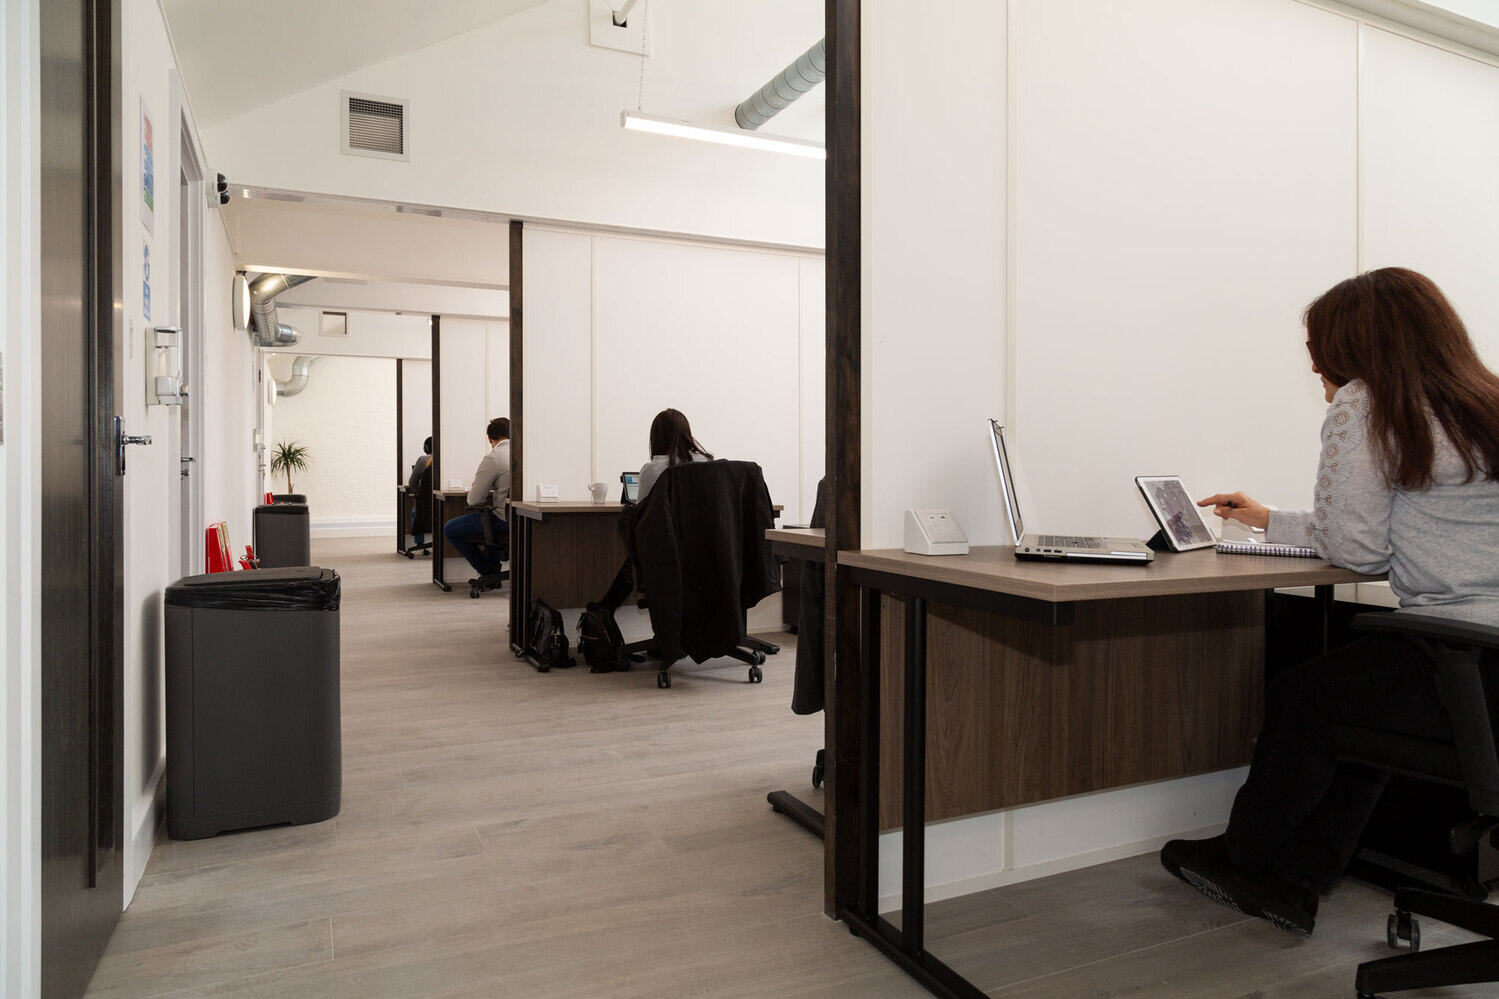 Flexible workspace in Archway, North London